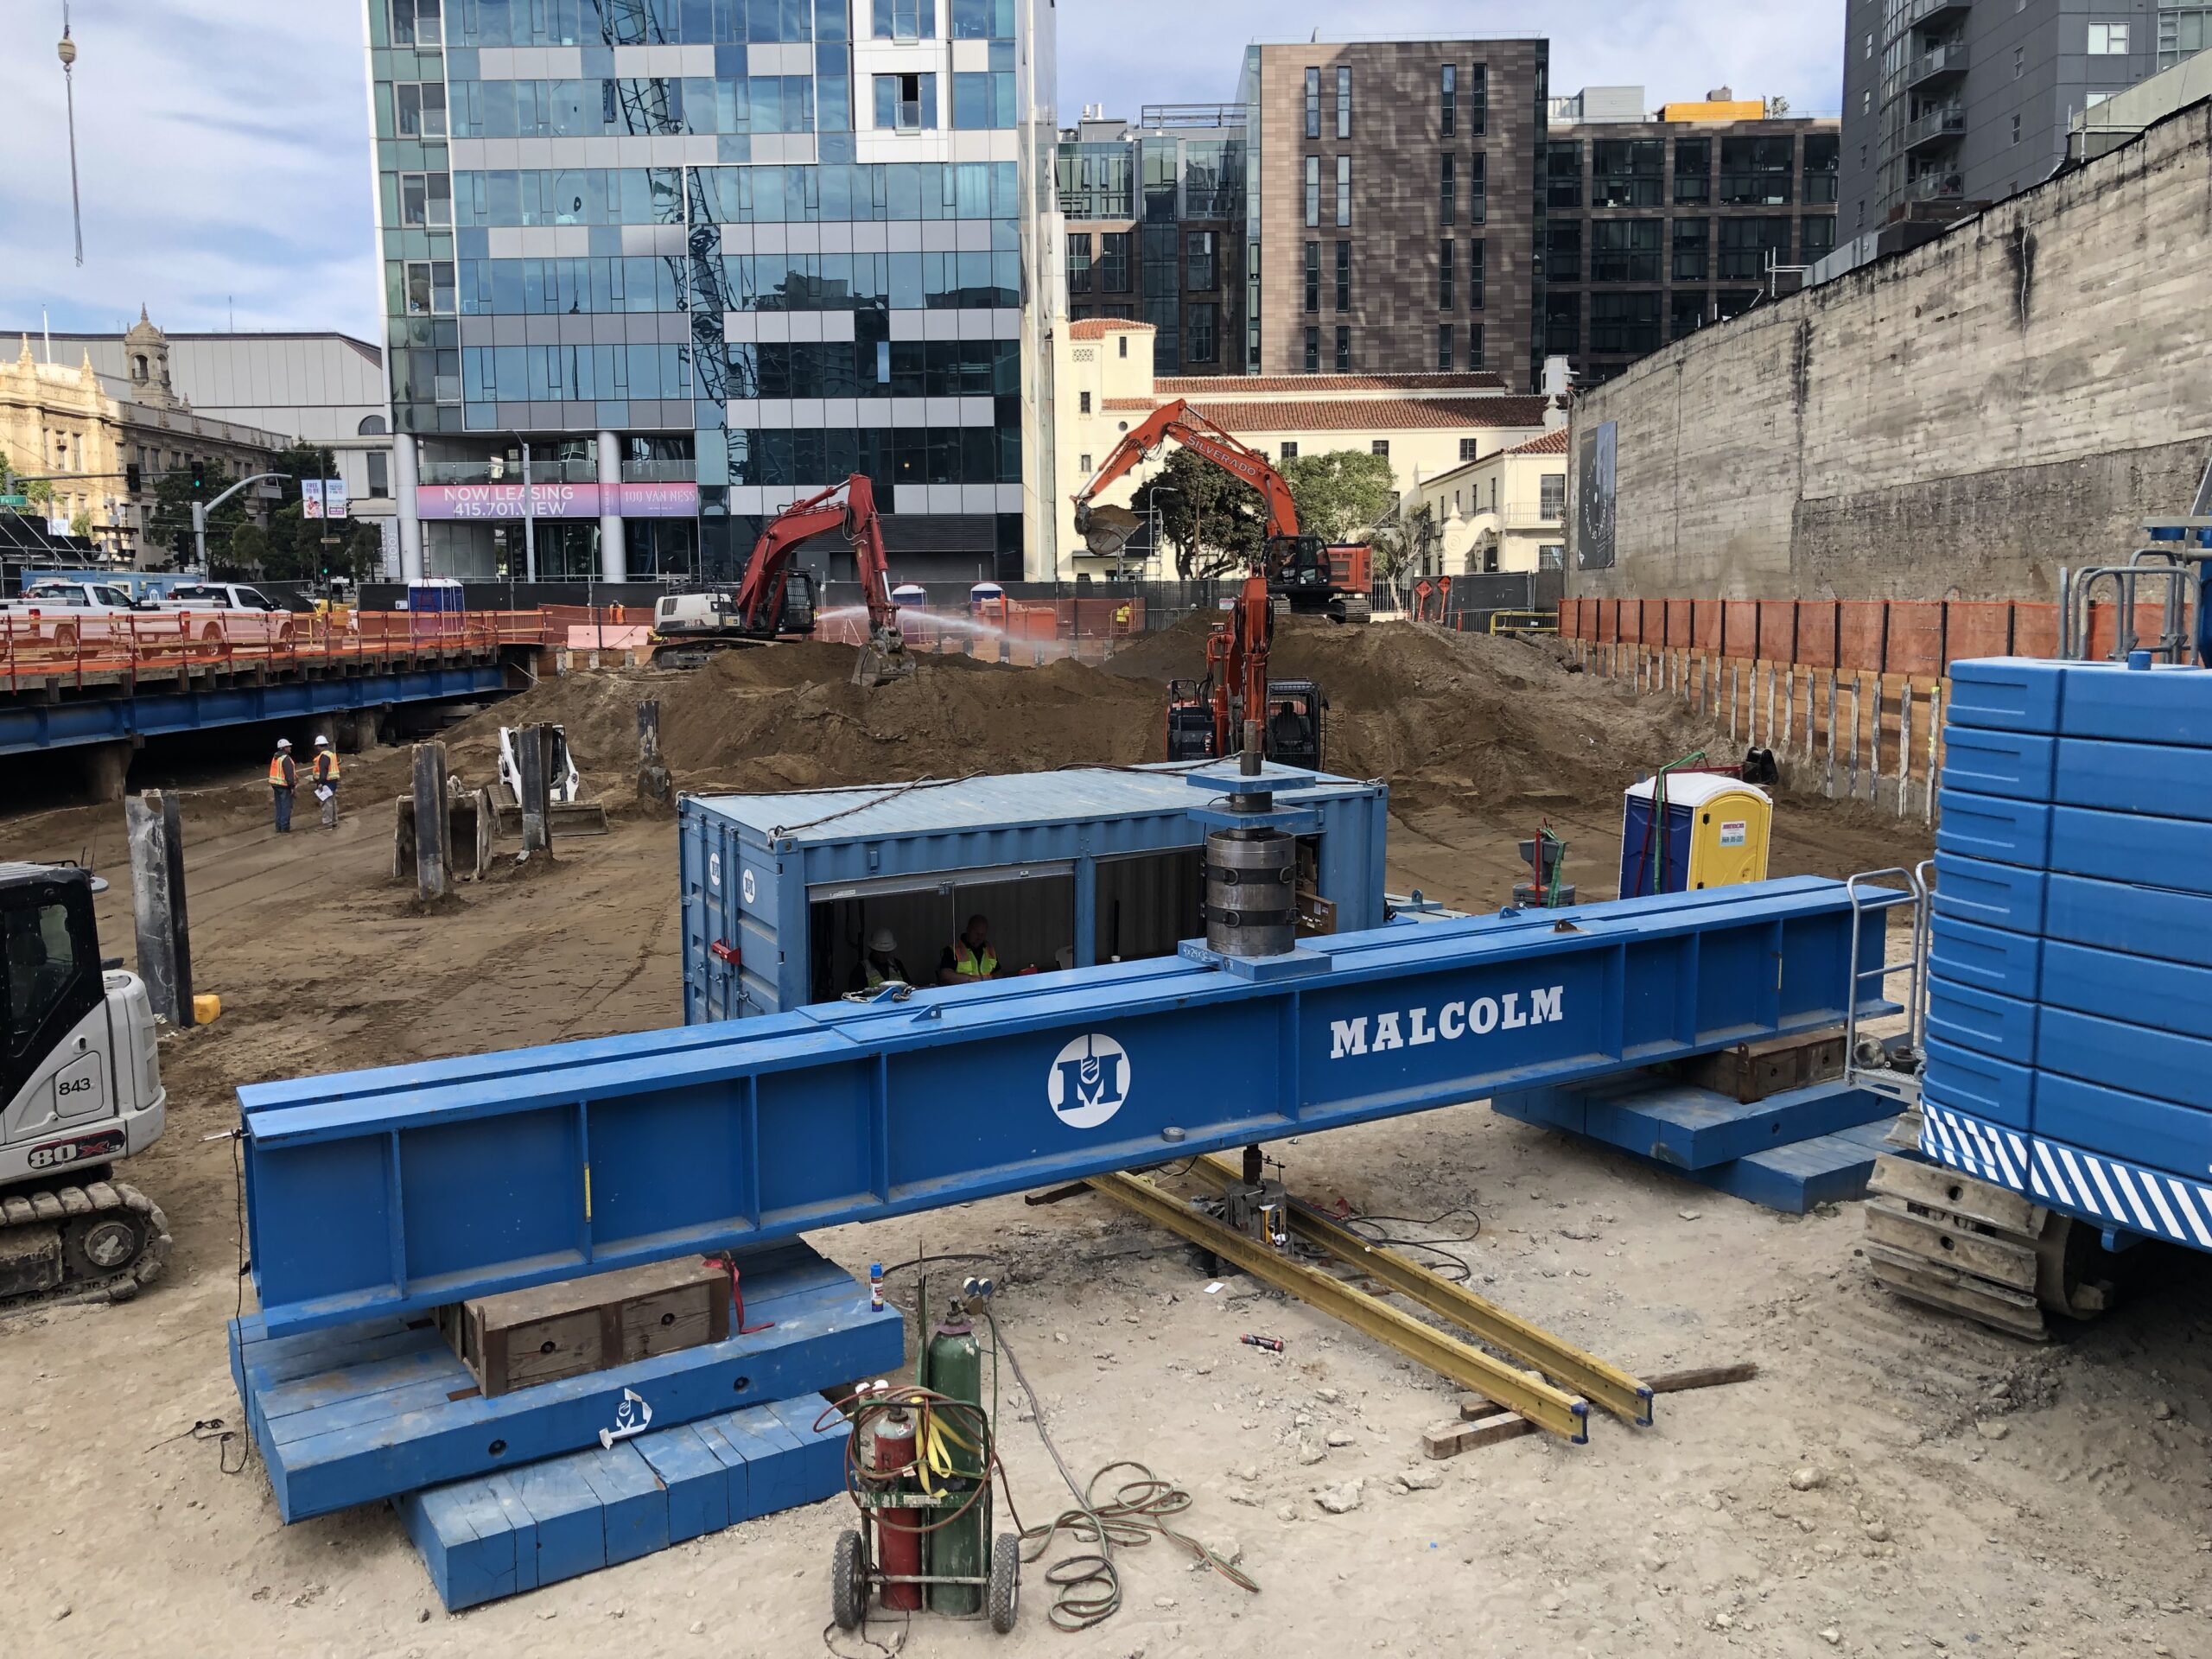 Testing: Malcolm Drilling's Impact on 30 Van Ness